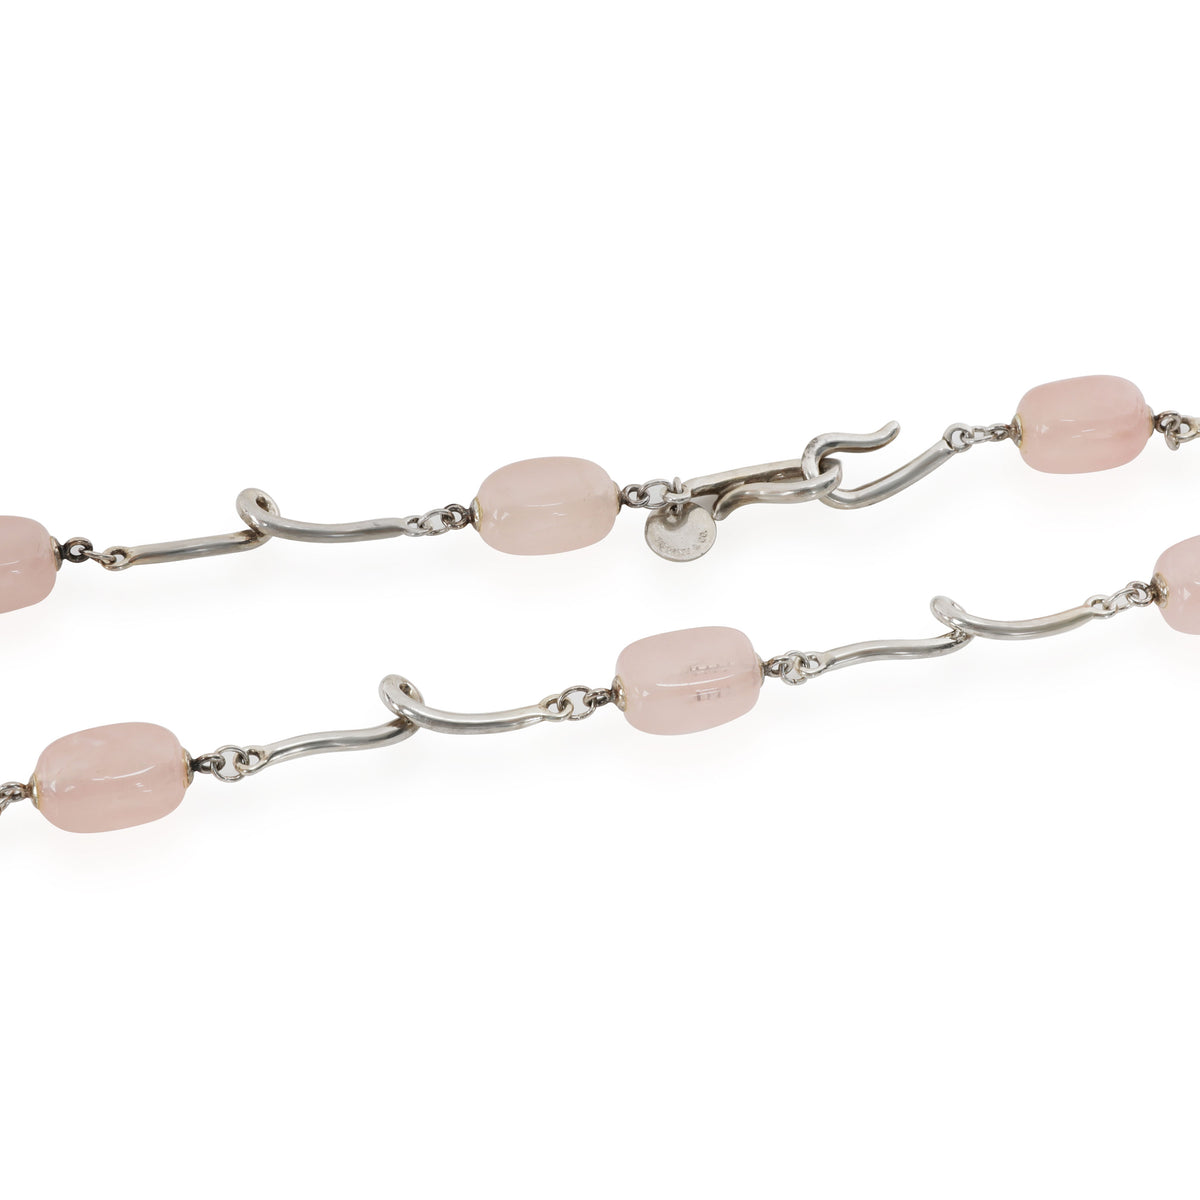 Tiffany & Co. Rose Quartz Necklace in  Sterling Silver